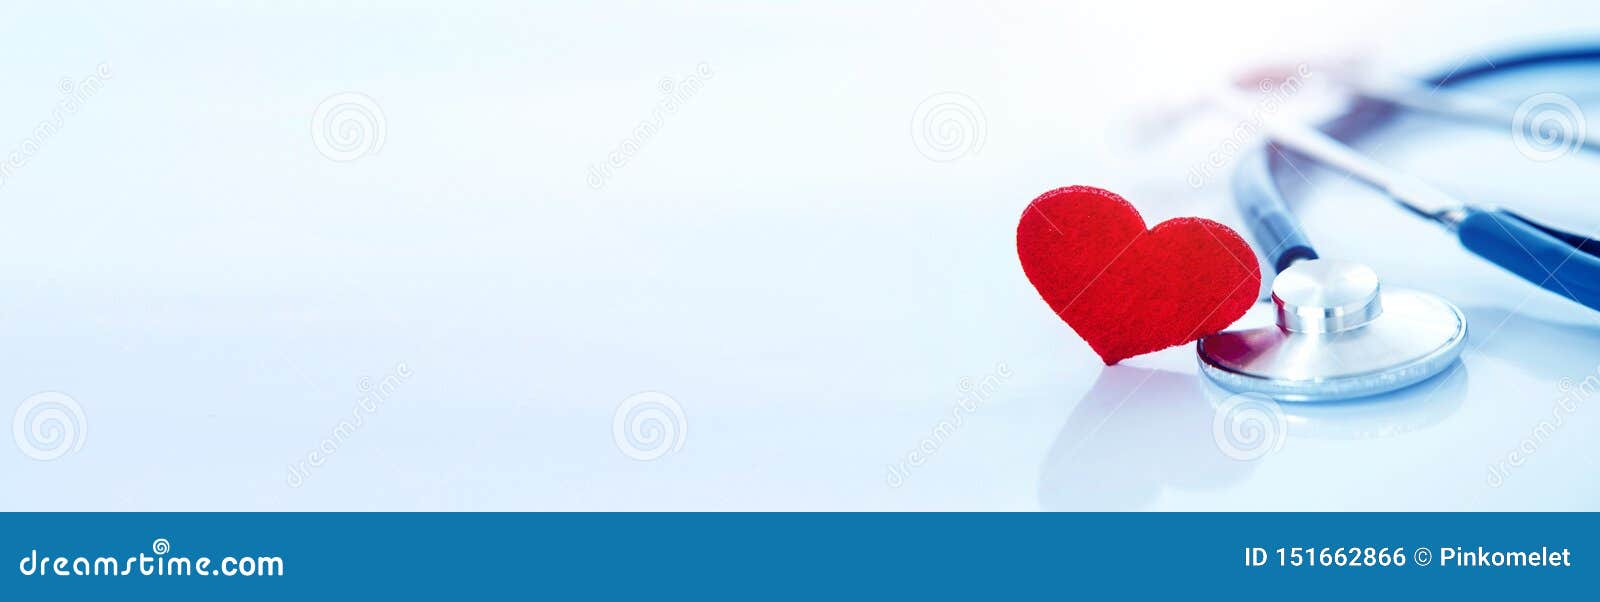 health  insurance and medical healthcare heart disease concept , a red heart  with stethoscope on white background